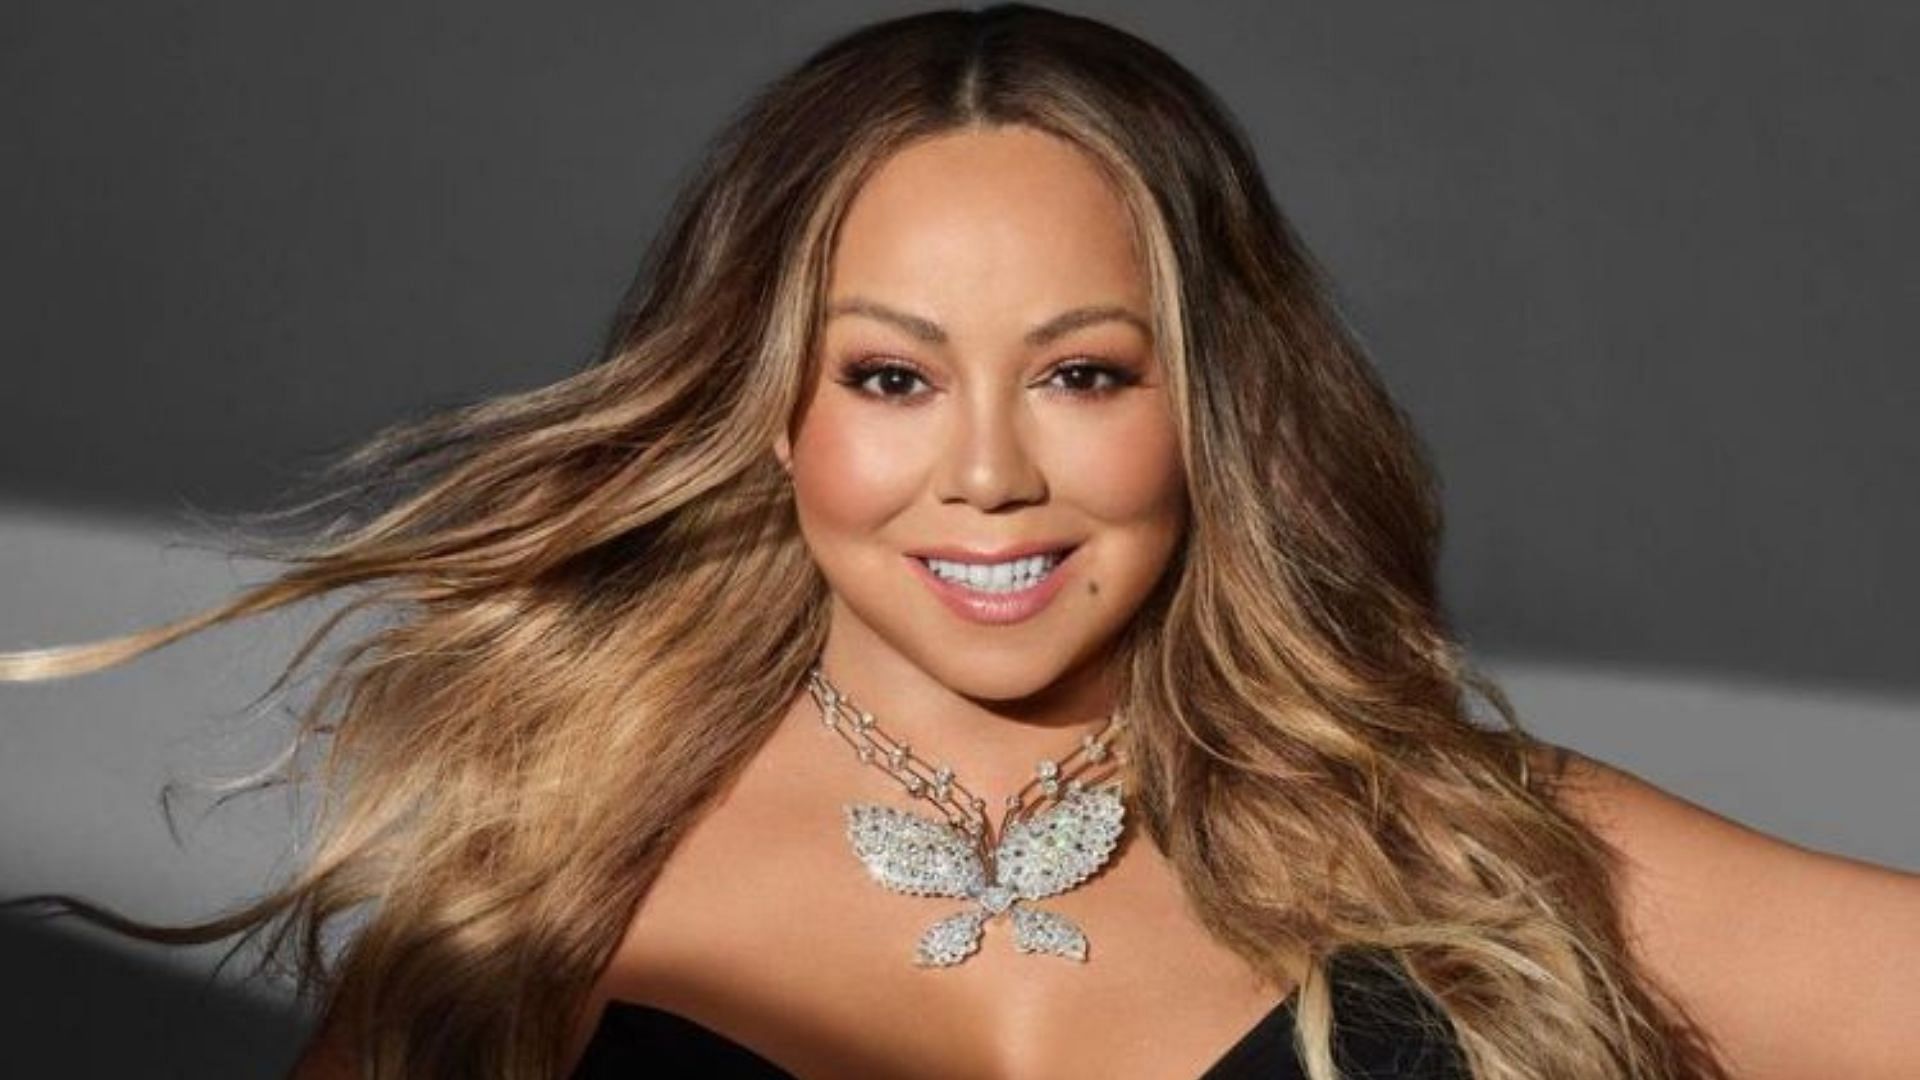 Mariah Carey x Chopard Happy Butterfly collection (Image via Instagram/@mariahcarey)